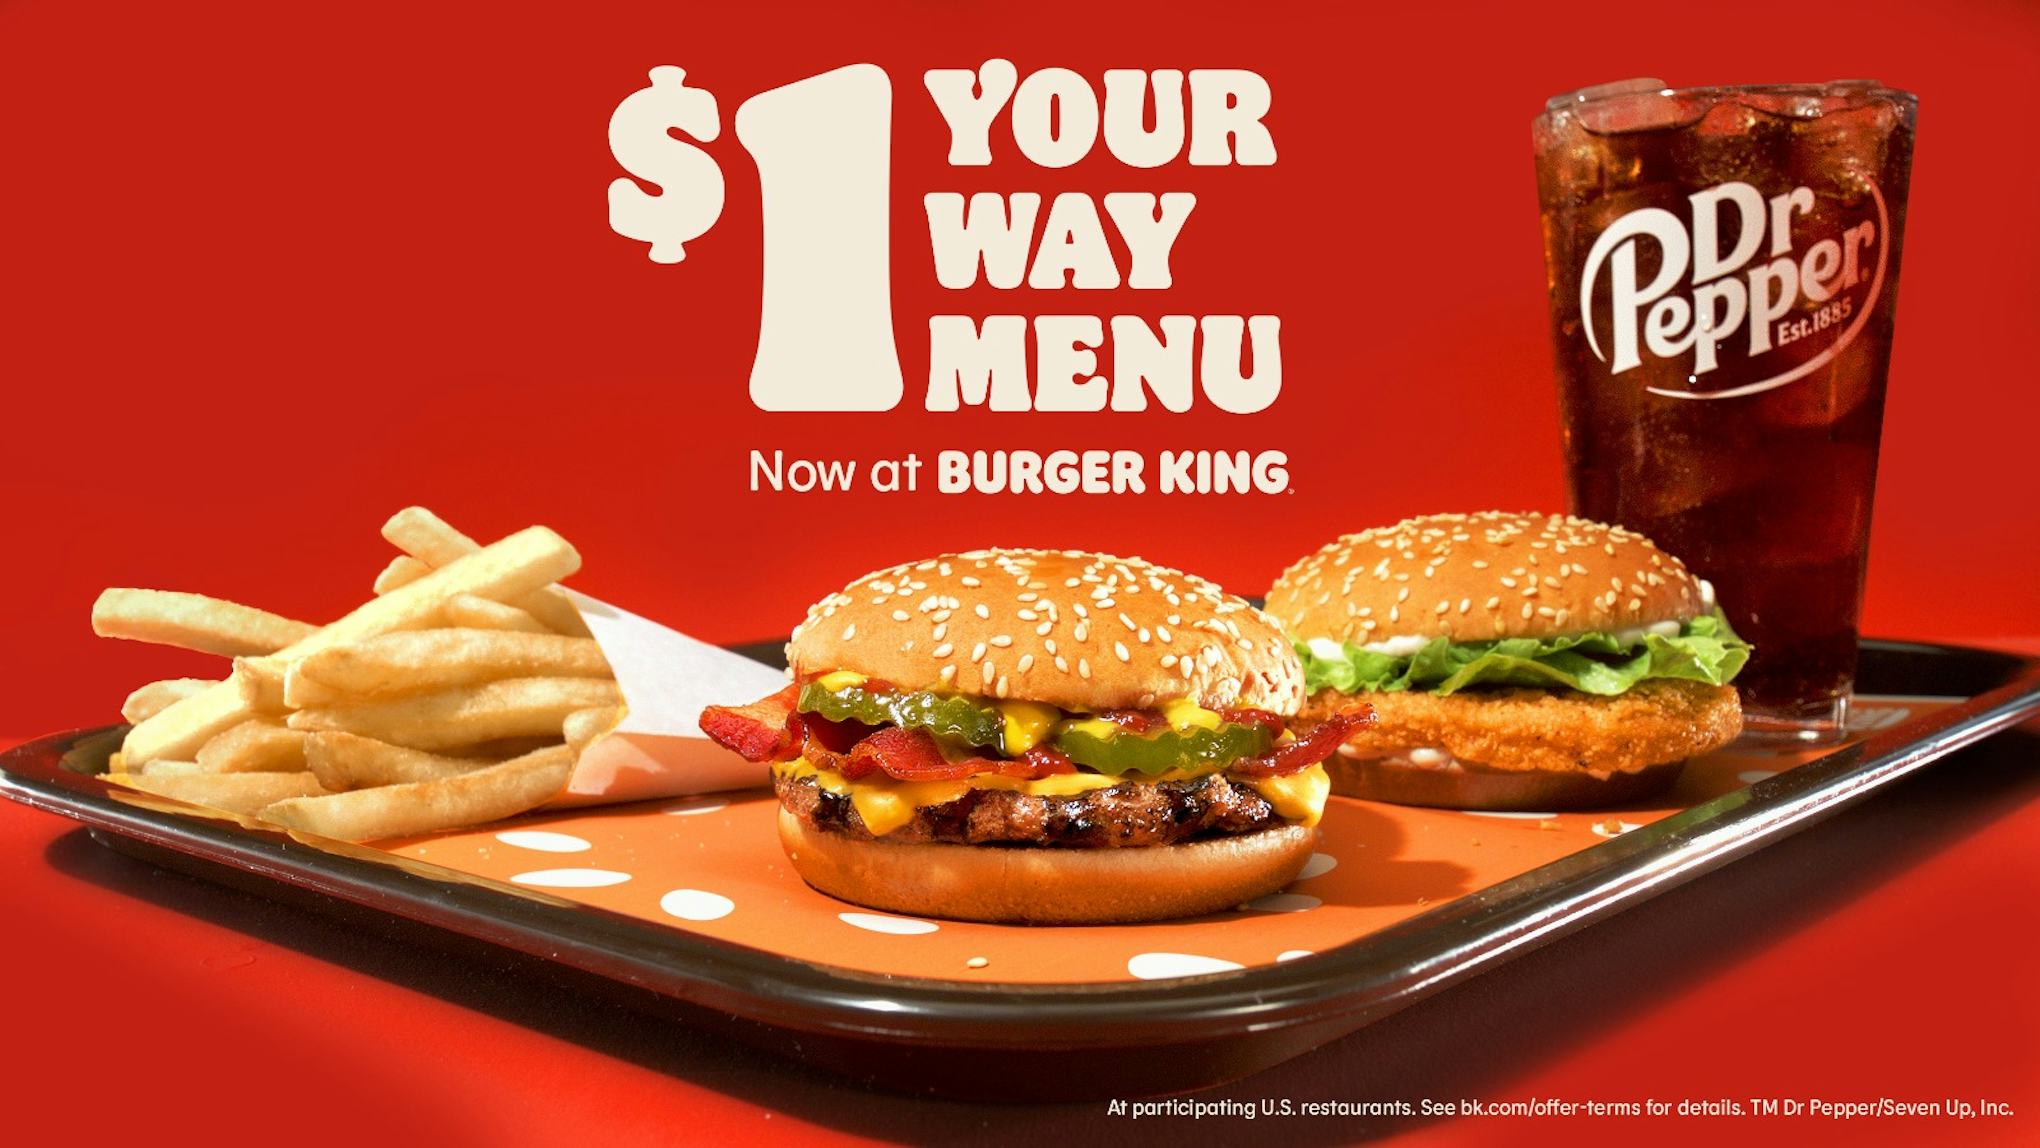 burger-king-s-new-1-your-way-menu-for-2021-is-launching-with-a-tasty-promo